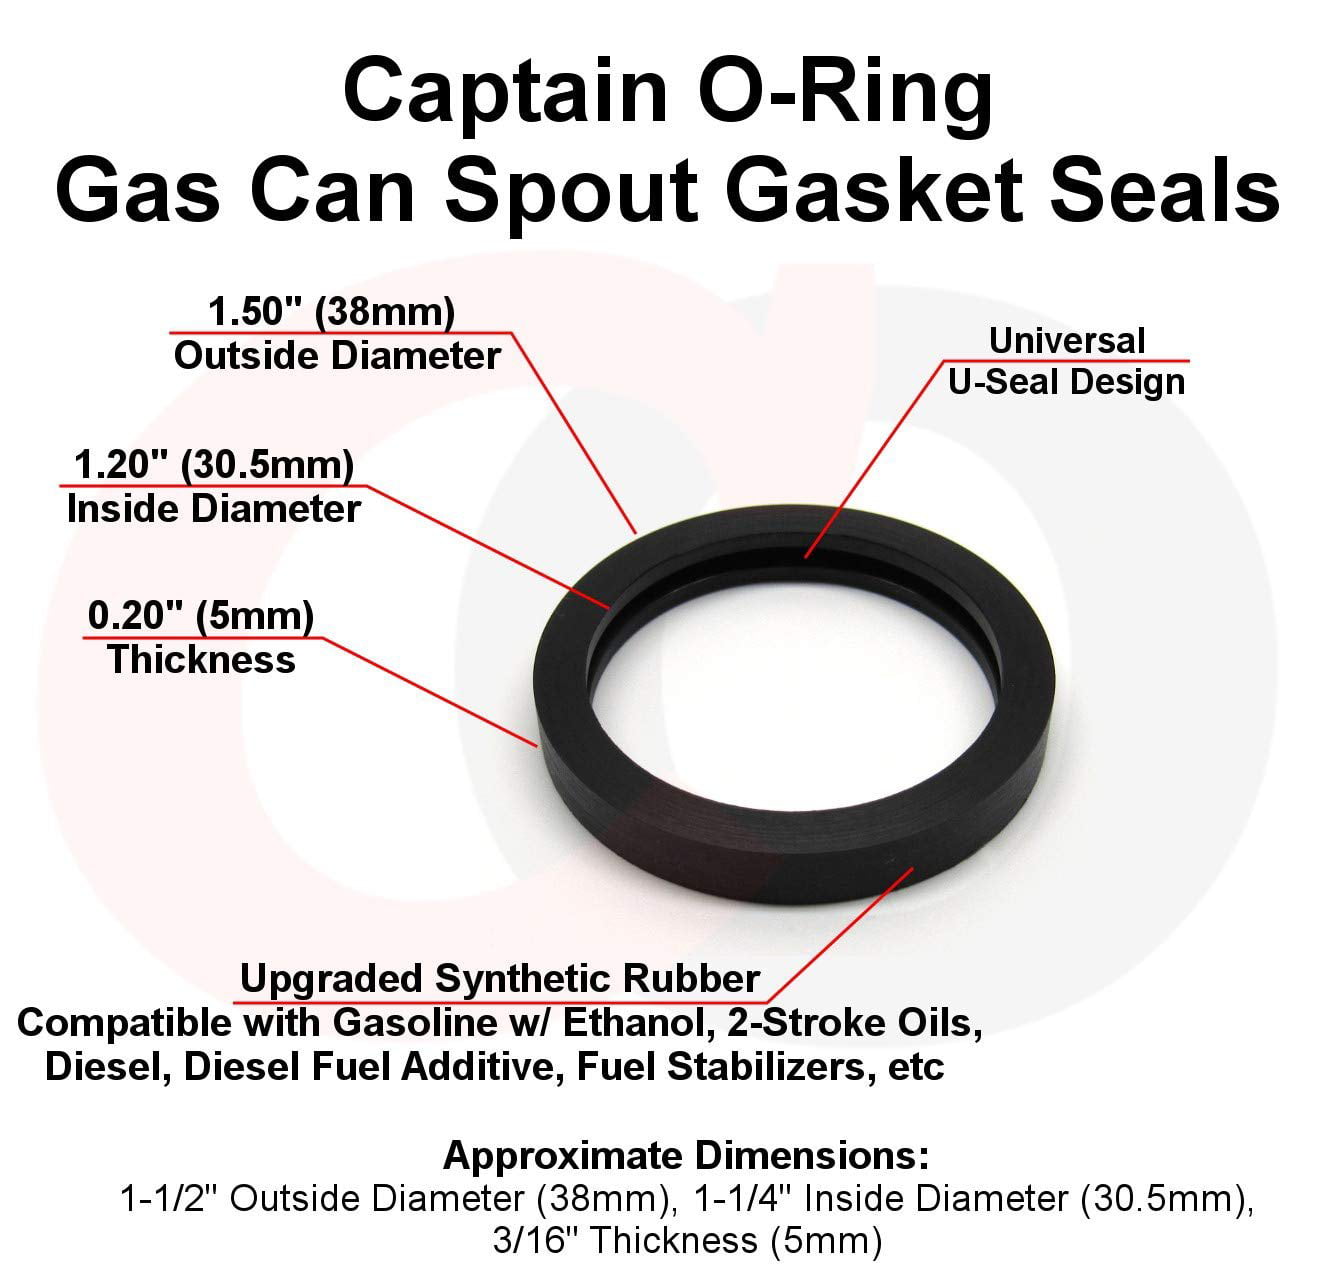 Shuian 10 Pack Gas Can Gaskets Replacement Gas Gaskets Jerry Can Spout Gaskets Gas Gaskets Replacement Gaskets Rubber Fuel Gas Can Spout. 